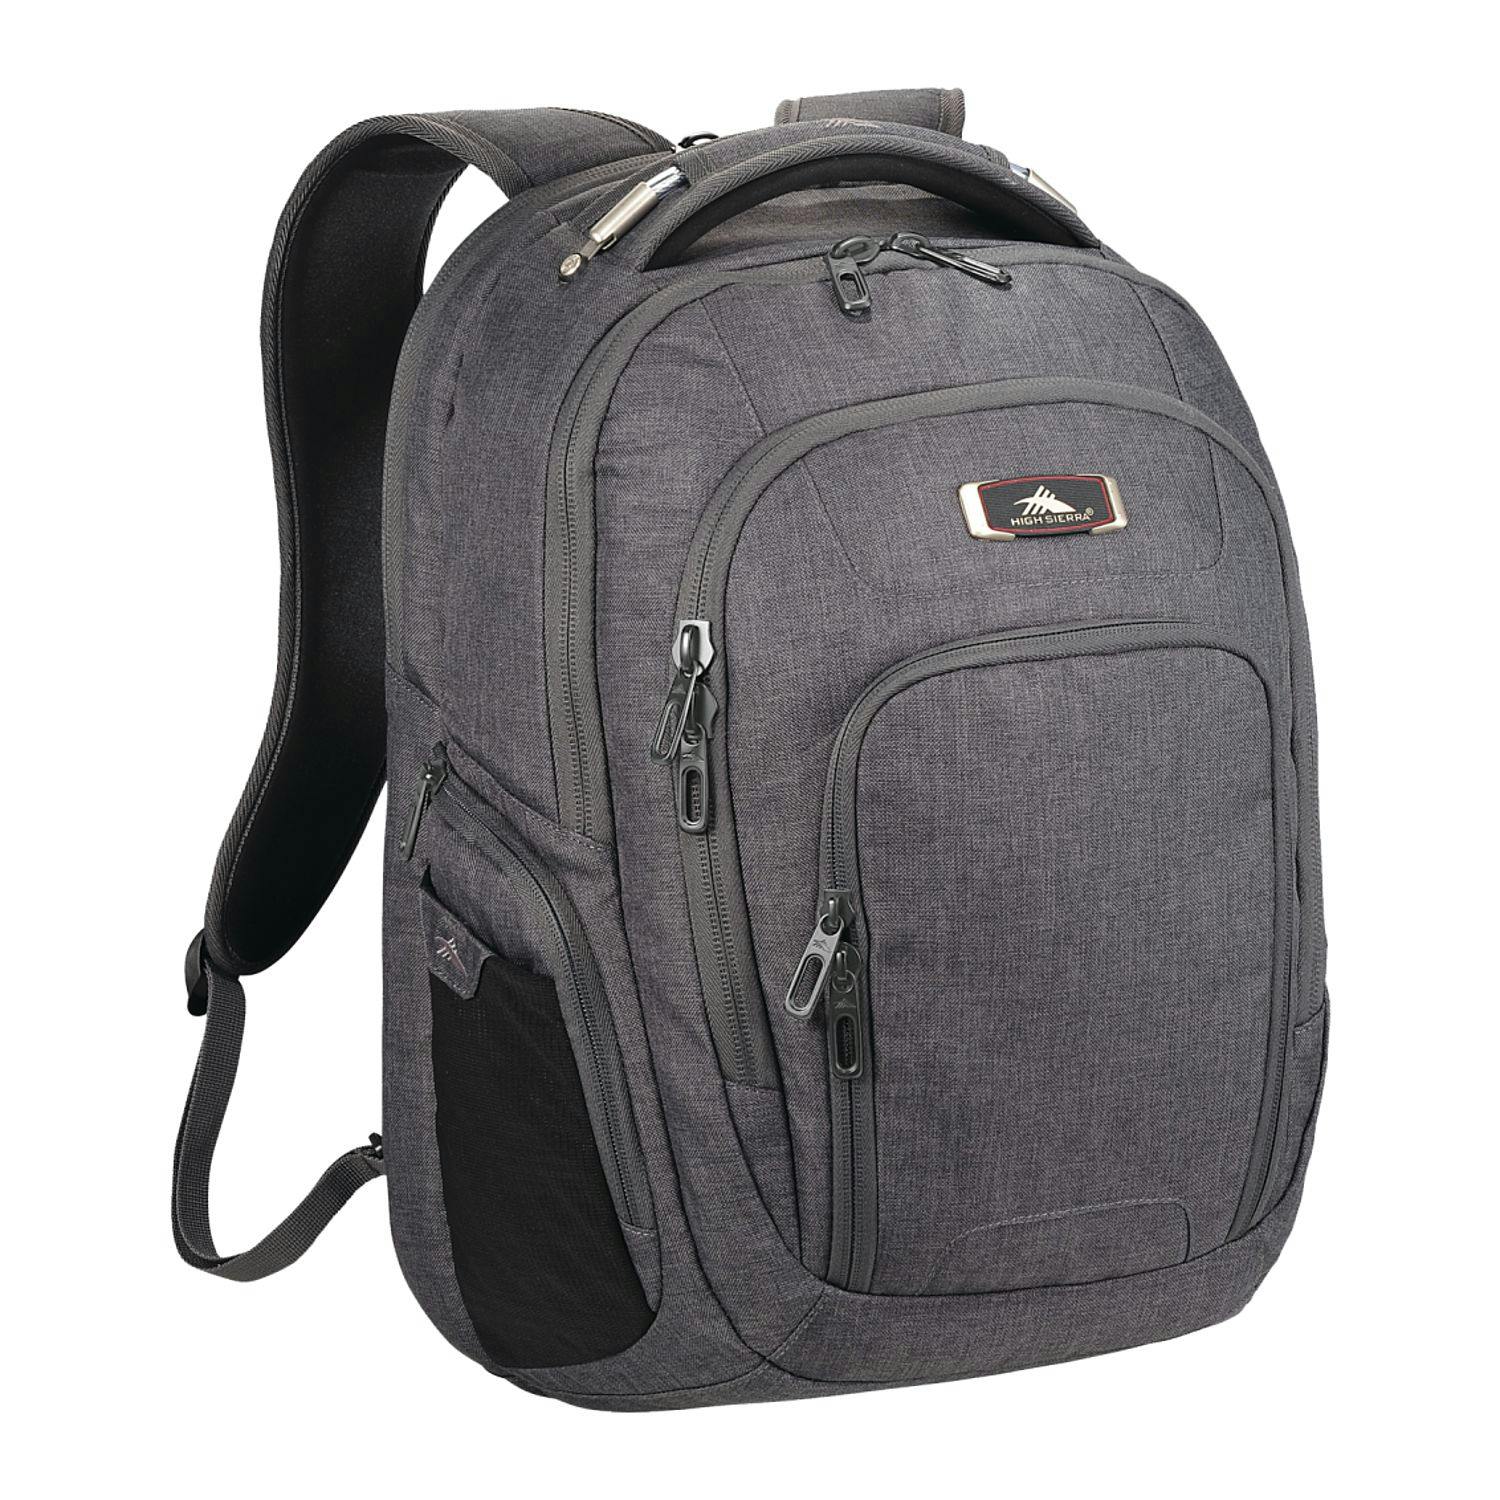 High Sierra 17" Computer UBT Deluxe Backpack - additional Image 1